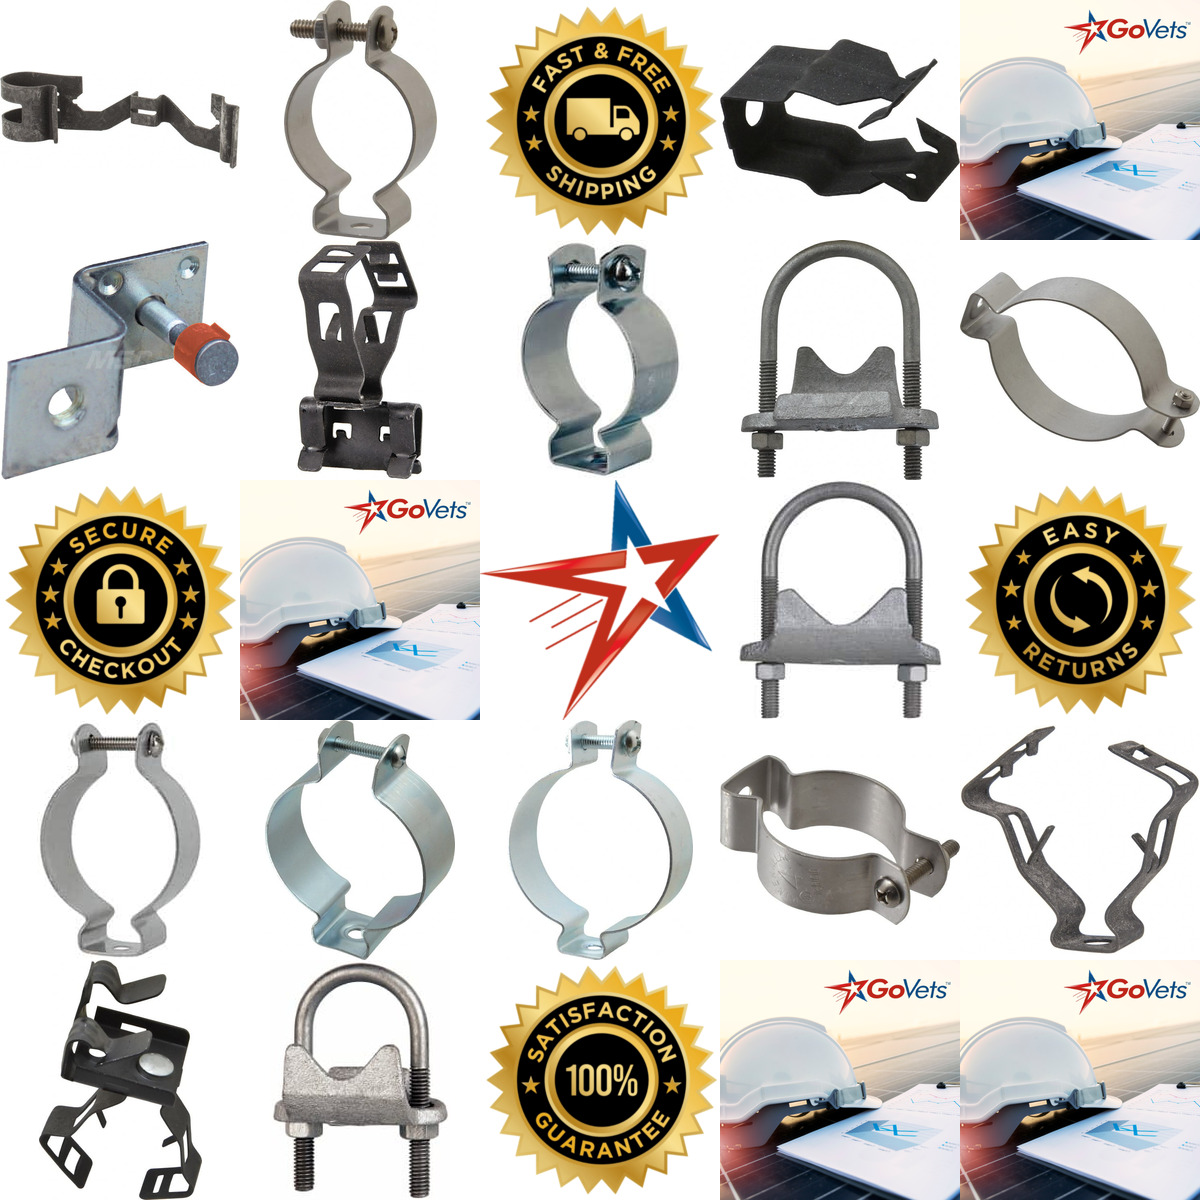 A selection of Conduit Hangers Holders and Fasteners products on GoVets